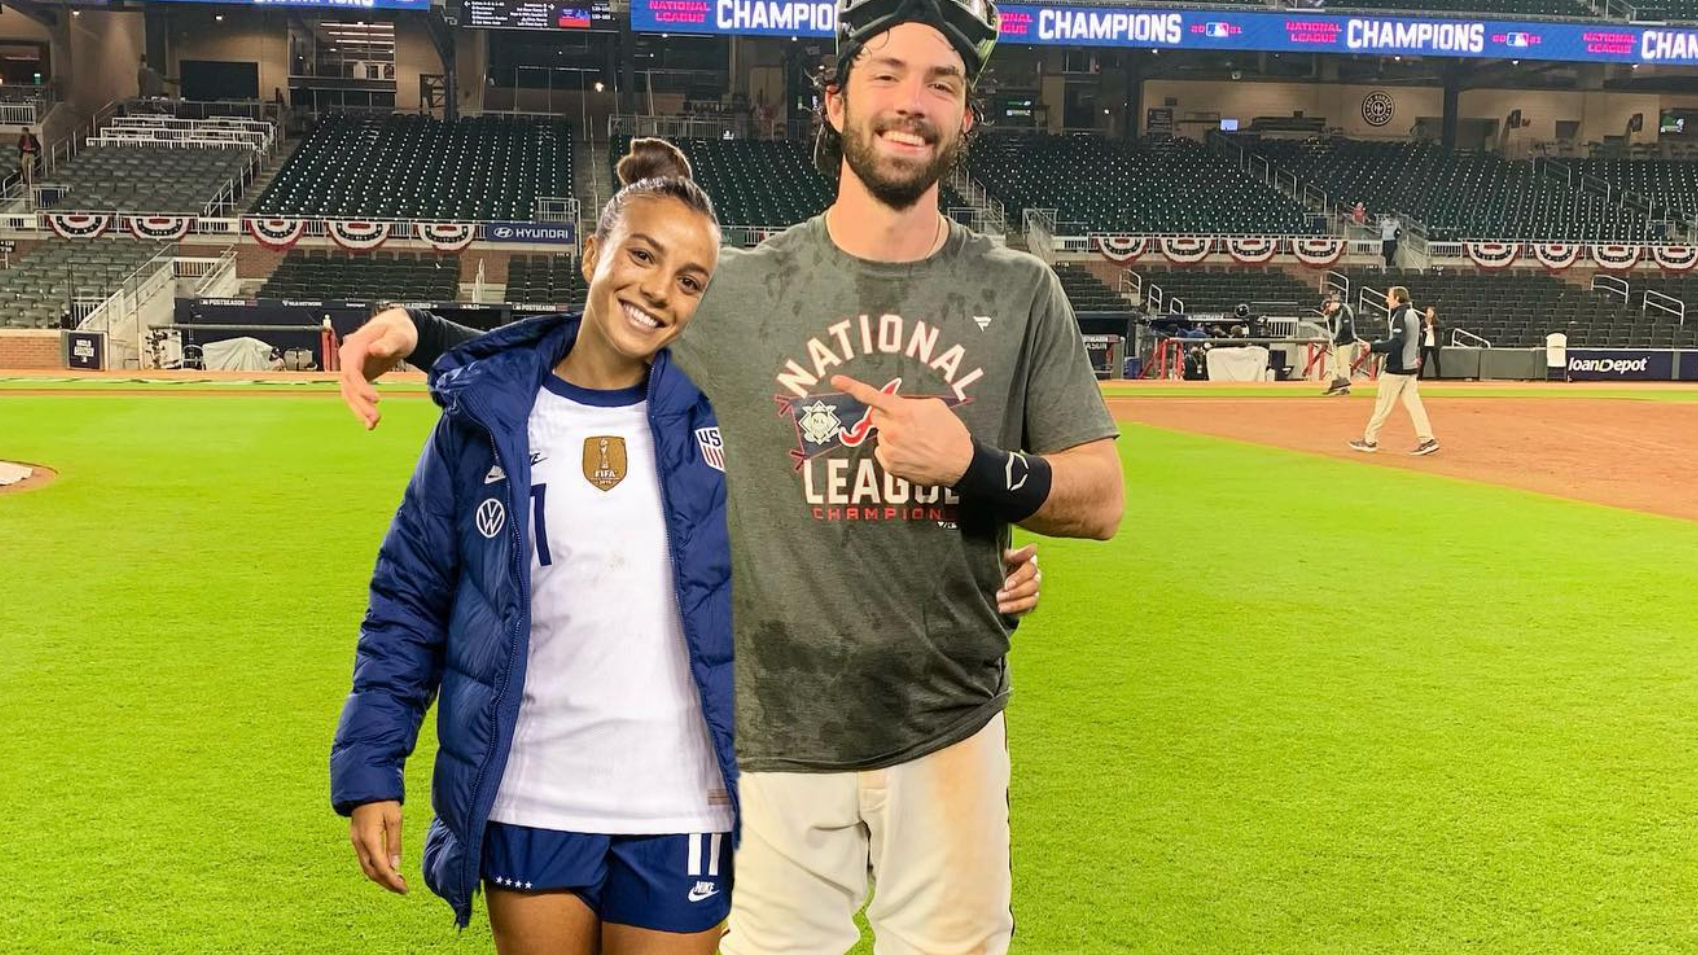 Dansby Swanson, Mallory Pugh get married with their focus on God